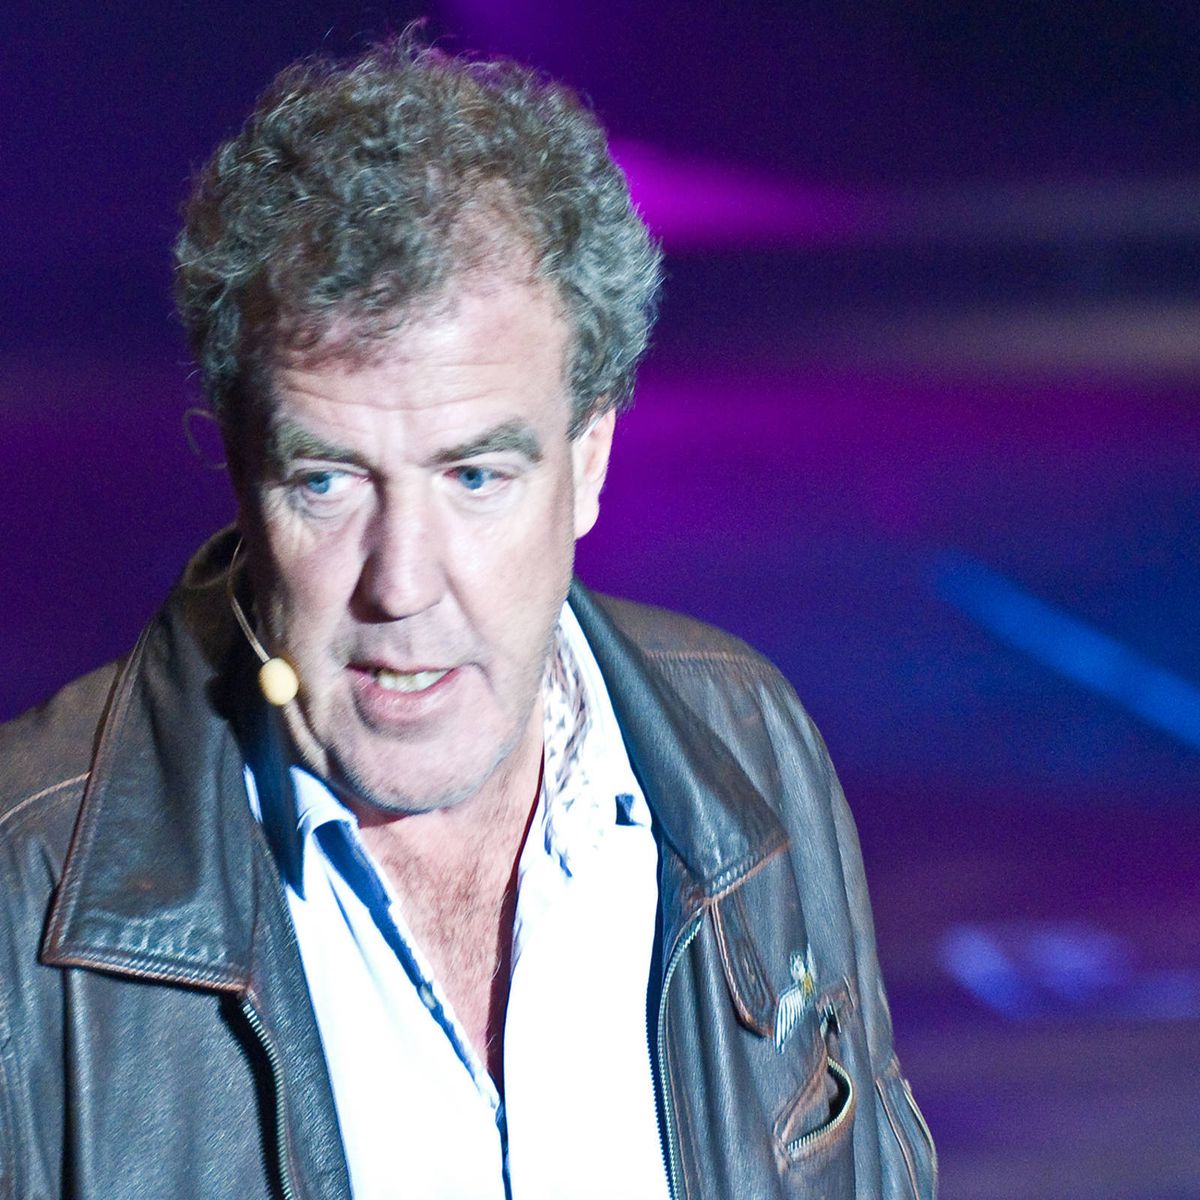 Jeremy Clarkson Just Took His Last Ever Lap Around the Top Gear